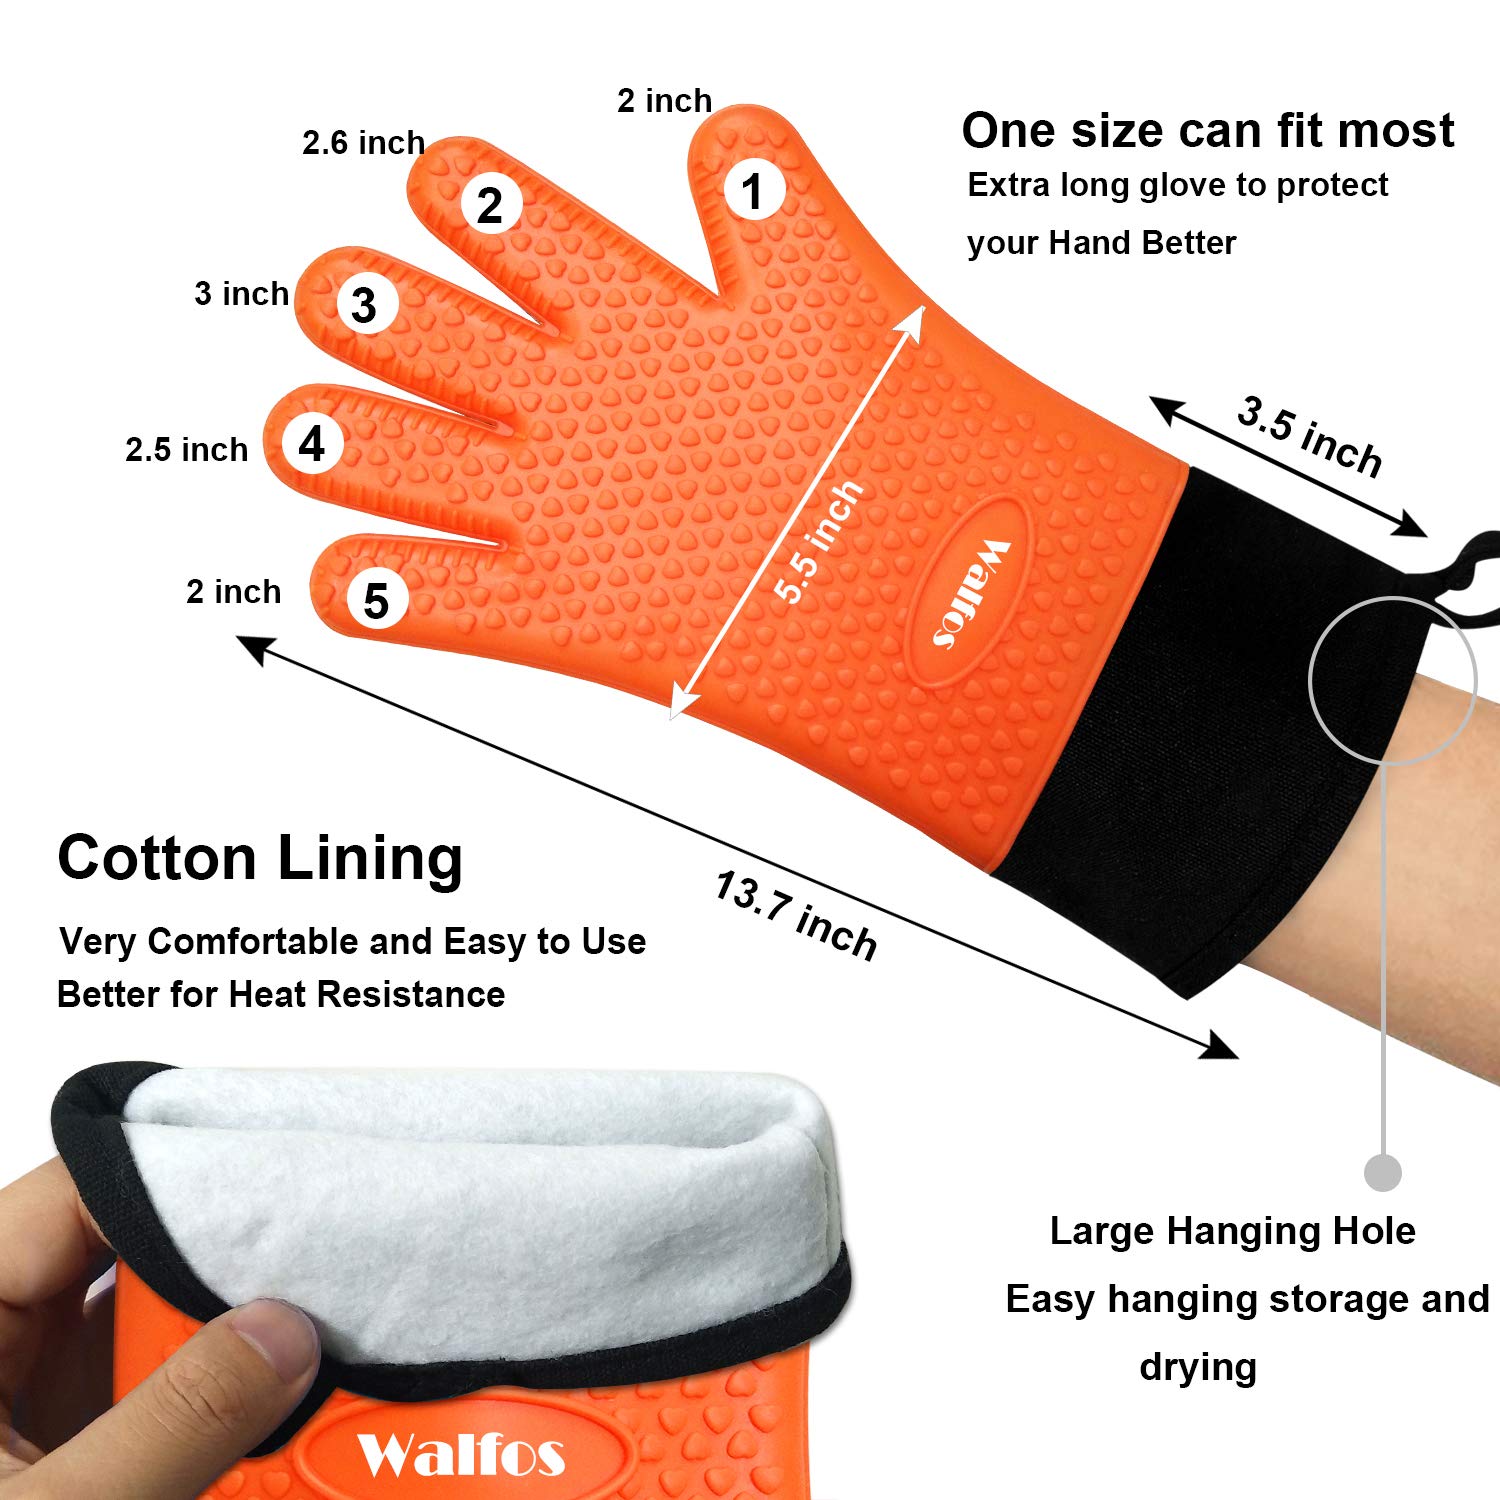 Walfos Silicone BBQ Gloves - Heat Resistant Grilling Gloves, Premium Non-Slip Kitchen Oven Mitt with Protective Cotton Layer Inside, Waterproof, Great for Grilling, Kitchen and Cooking, Orange